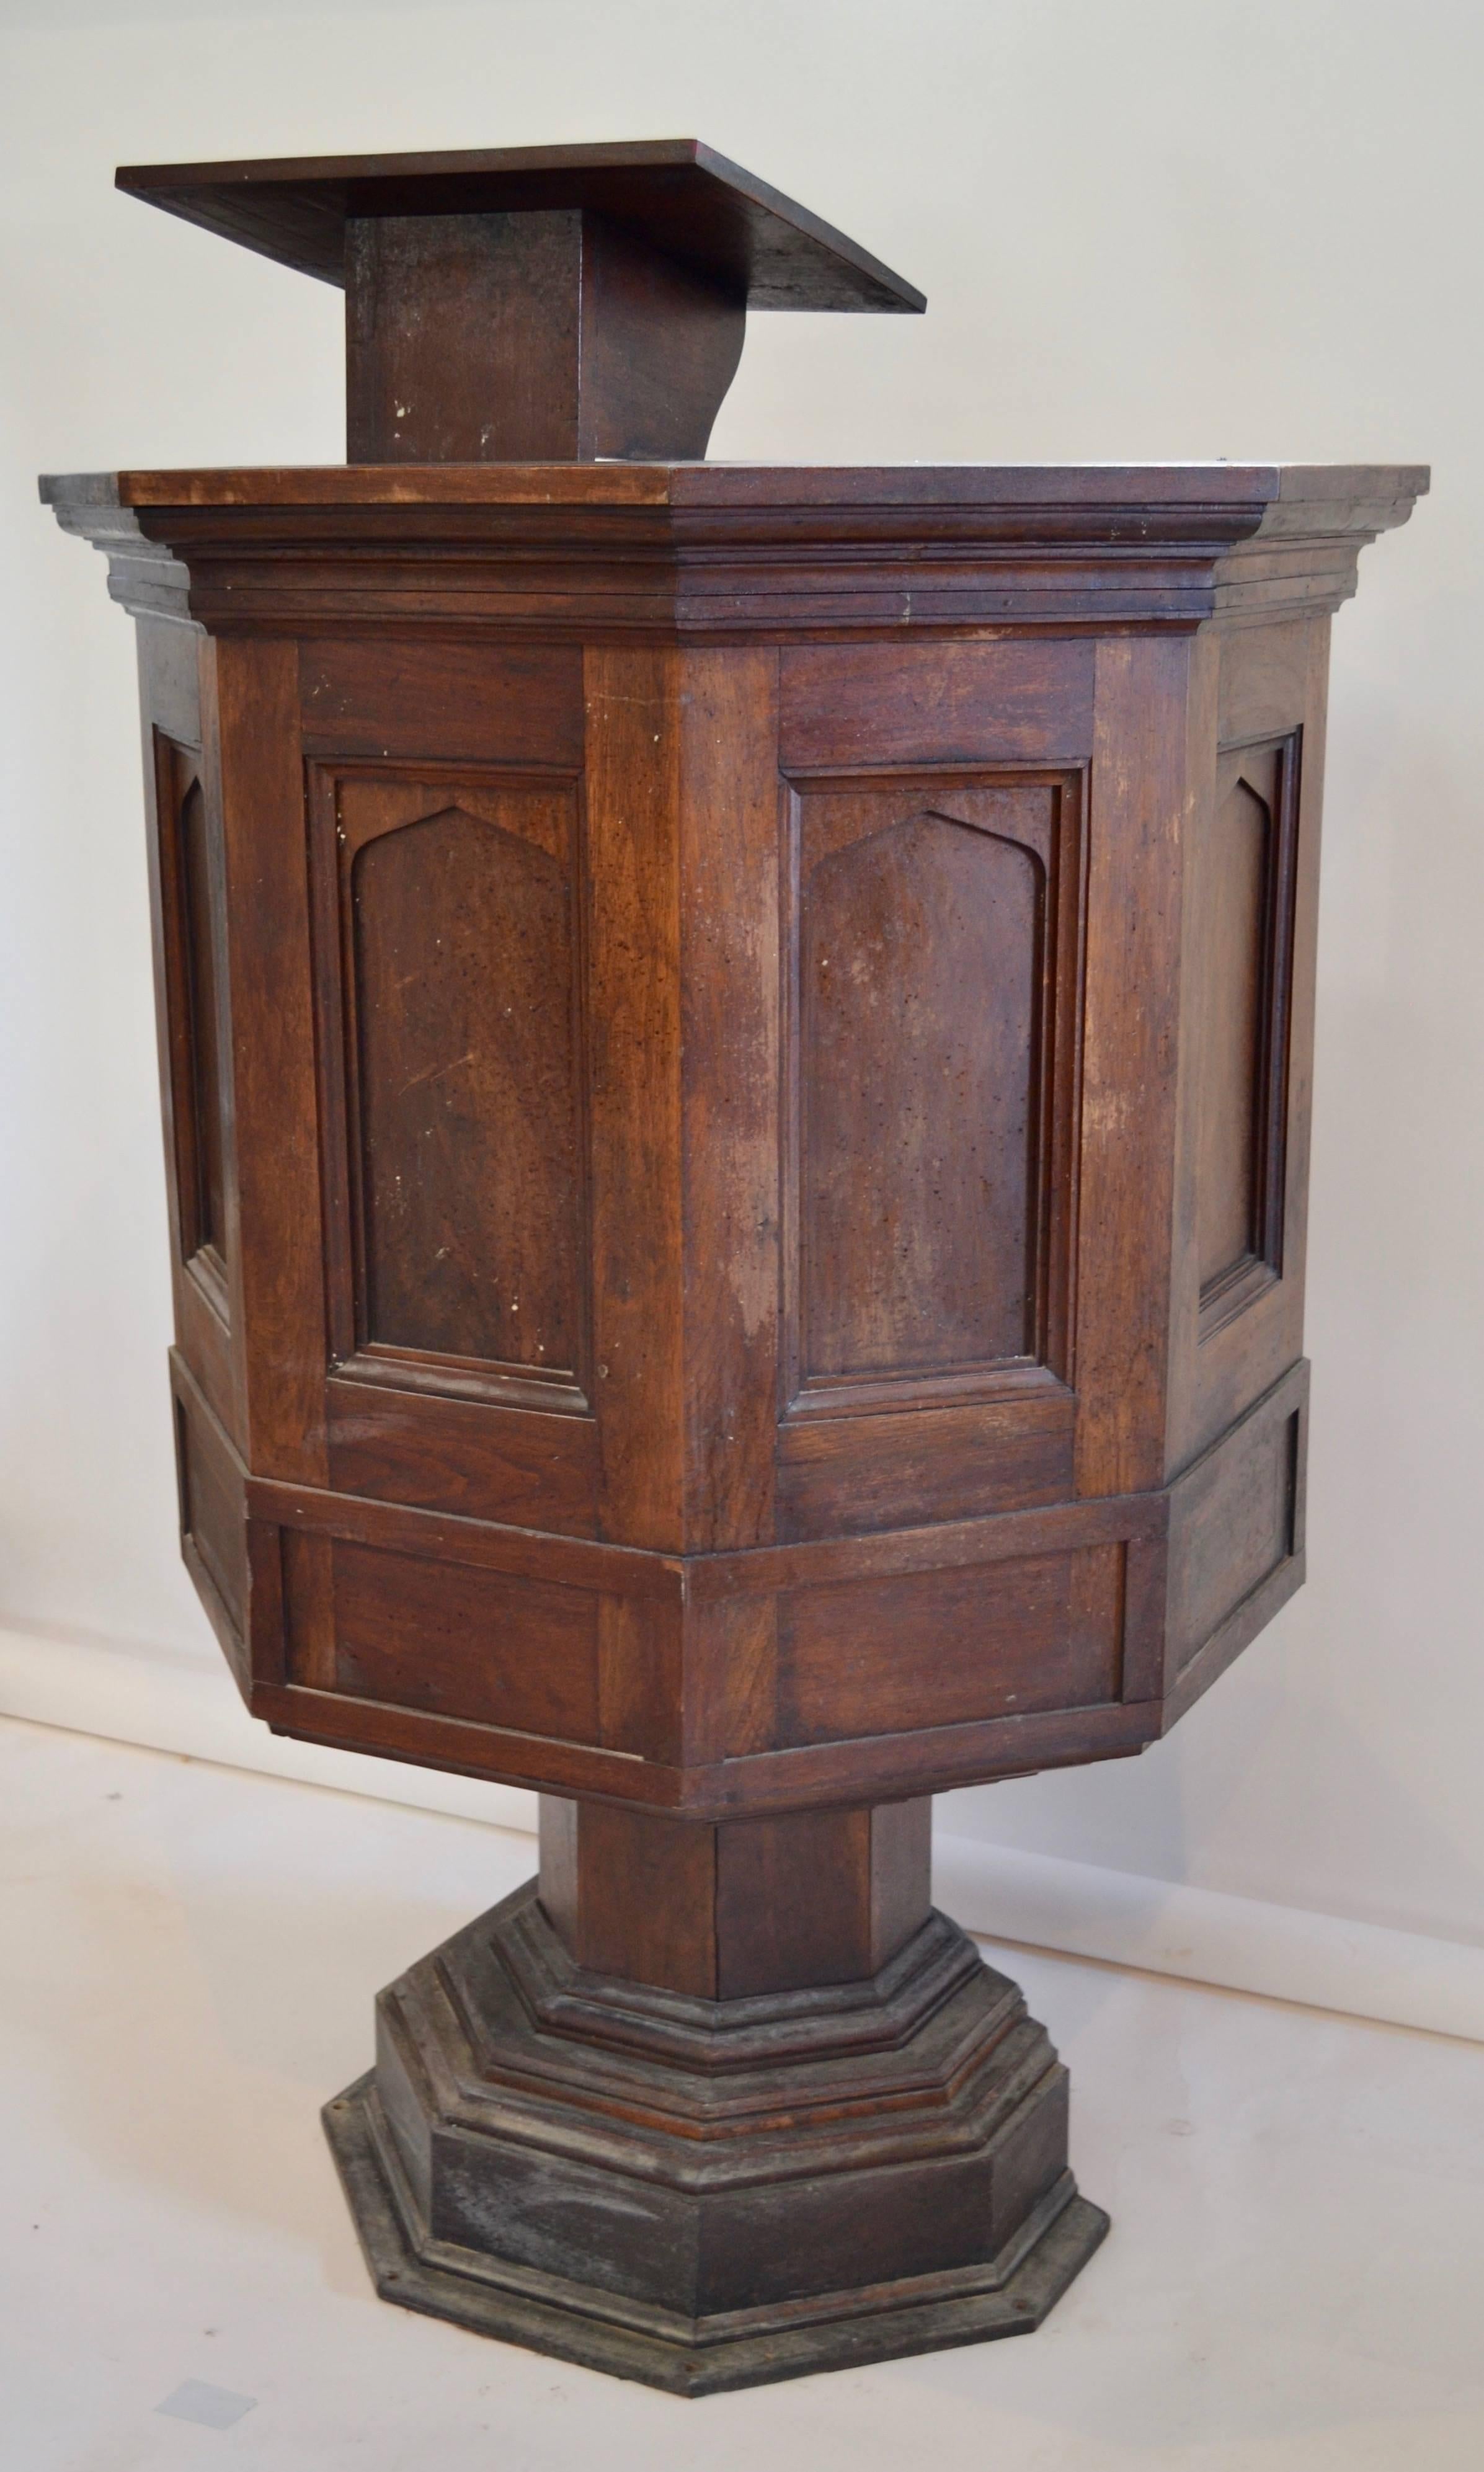 Walnut pulpit removed from Antebellum church in Baltimore. The lectern is adjustable.